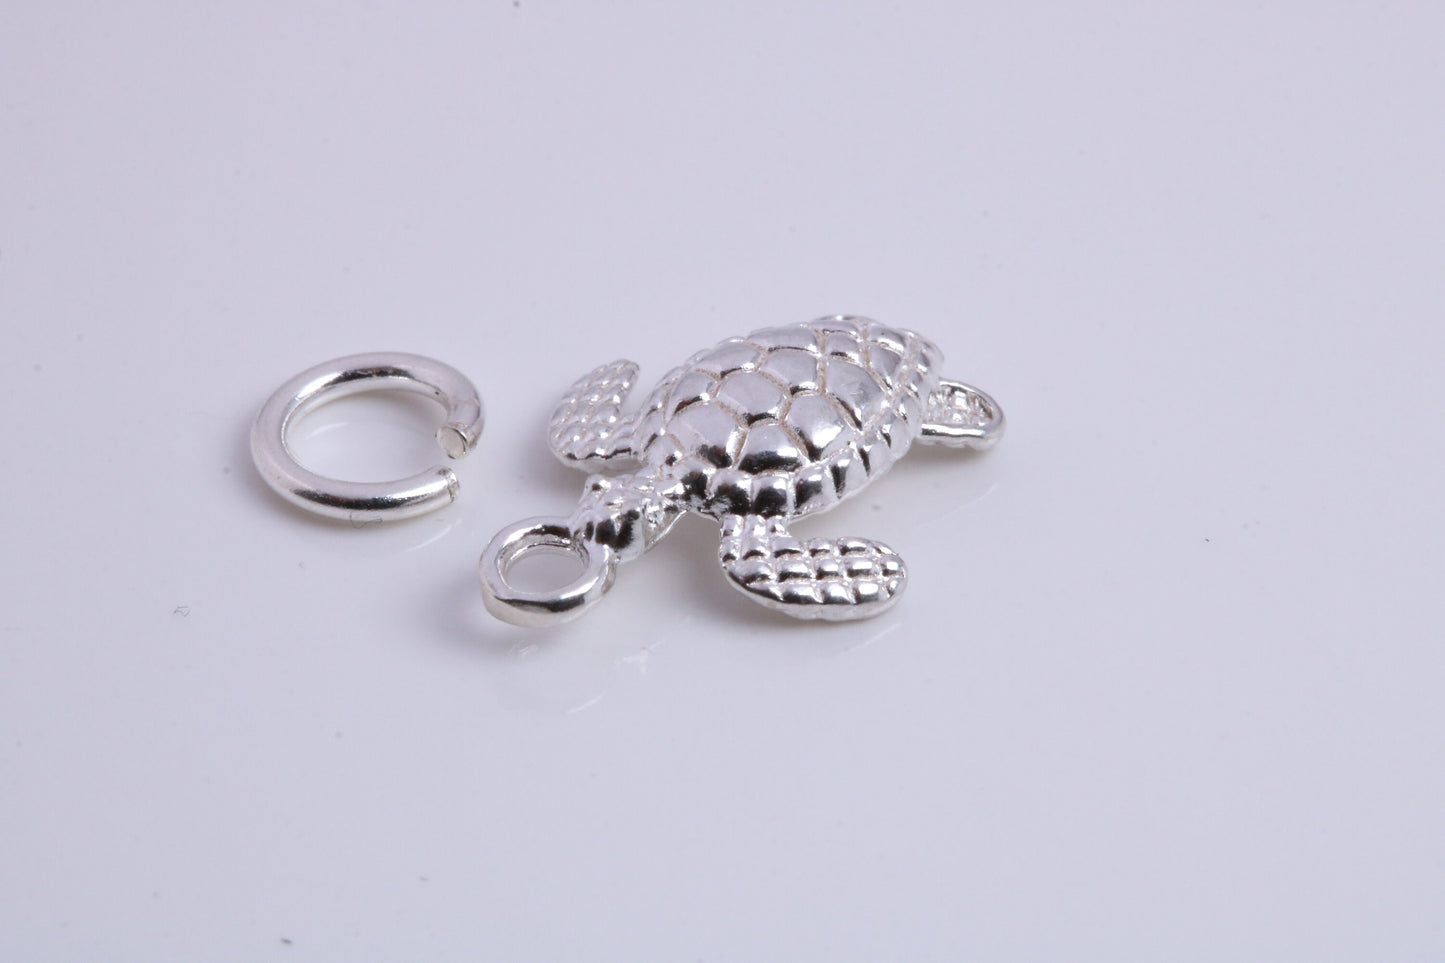 Turtle Charm, Traditional Charm, Made from Solid 925 Grade Sterling Silver, Complete with Attachment Link